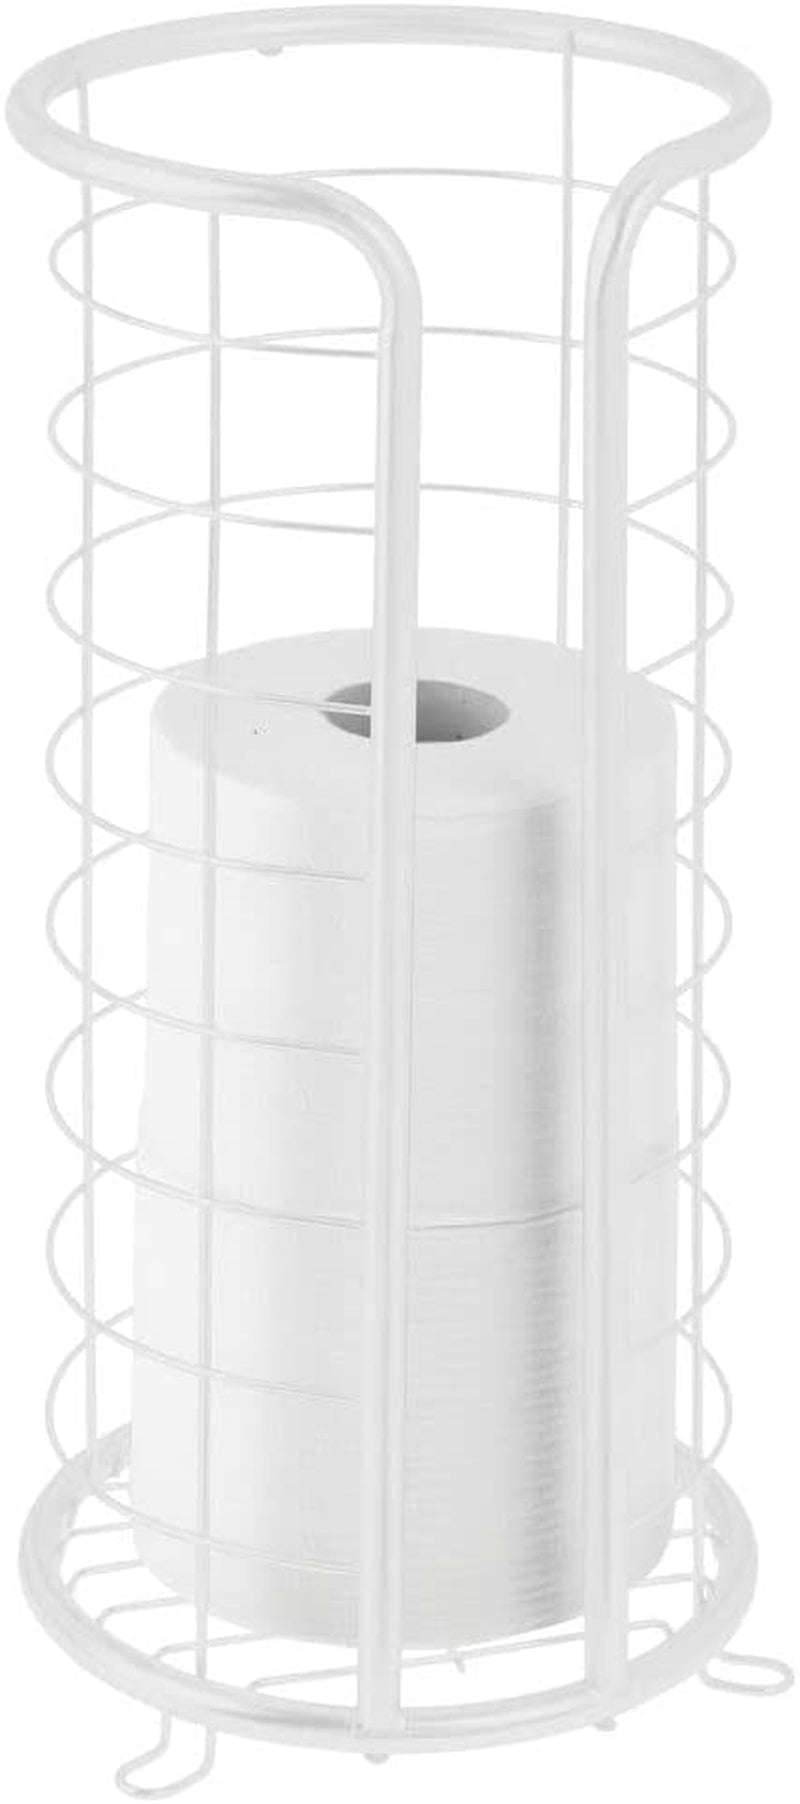 mDesign, Mdesign Metal Free Standing Toilet Paper Organizer Stand - 3 Rolls of Jumbo Toilet Tissue Storage - Bathroom Decor Accessory for under Sink, Vanity, and inside Cabinet Shelf - Omni Collection, Chrome